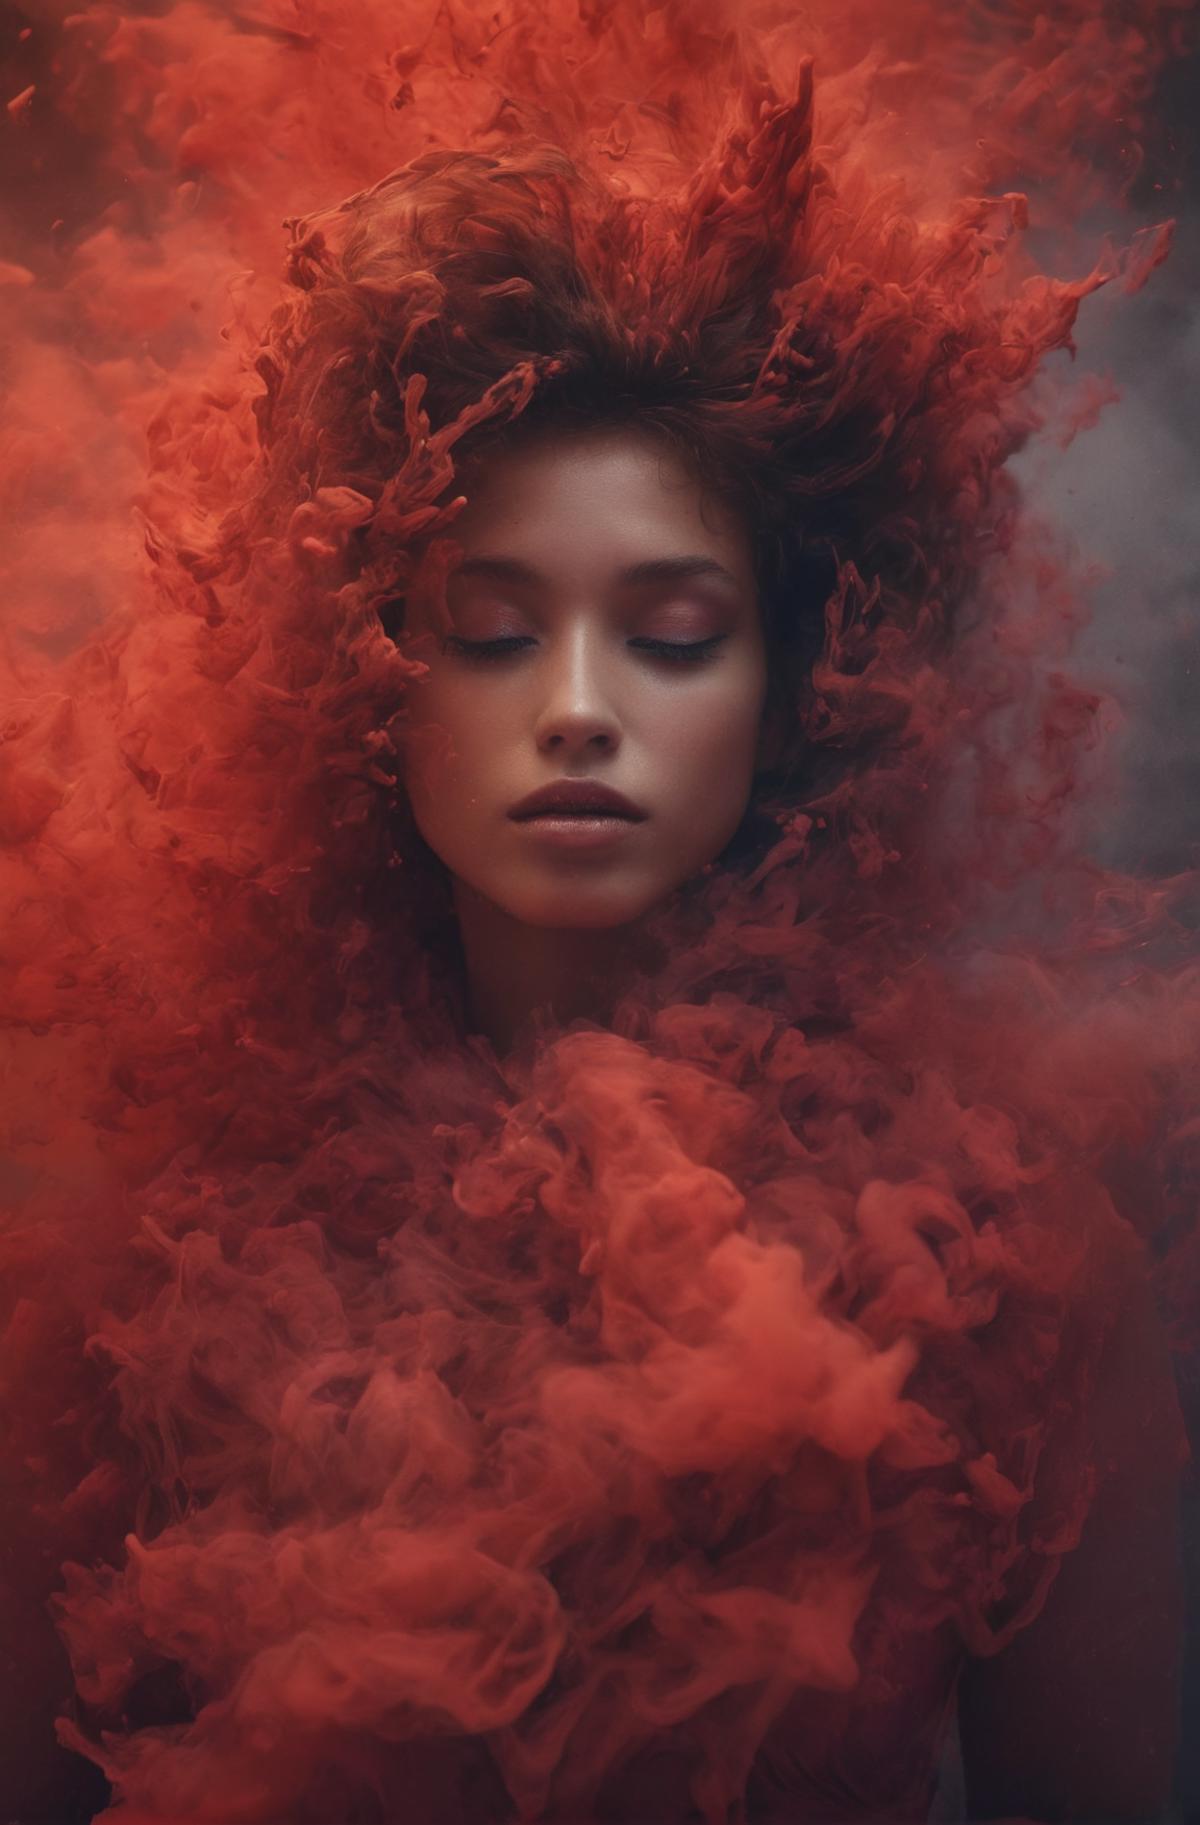 A woman with red hair and red makeup, surrounded by red smoke or fog.